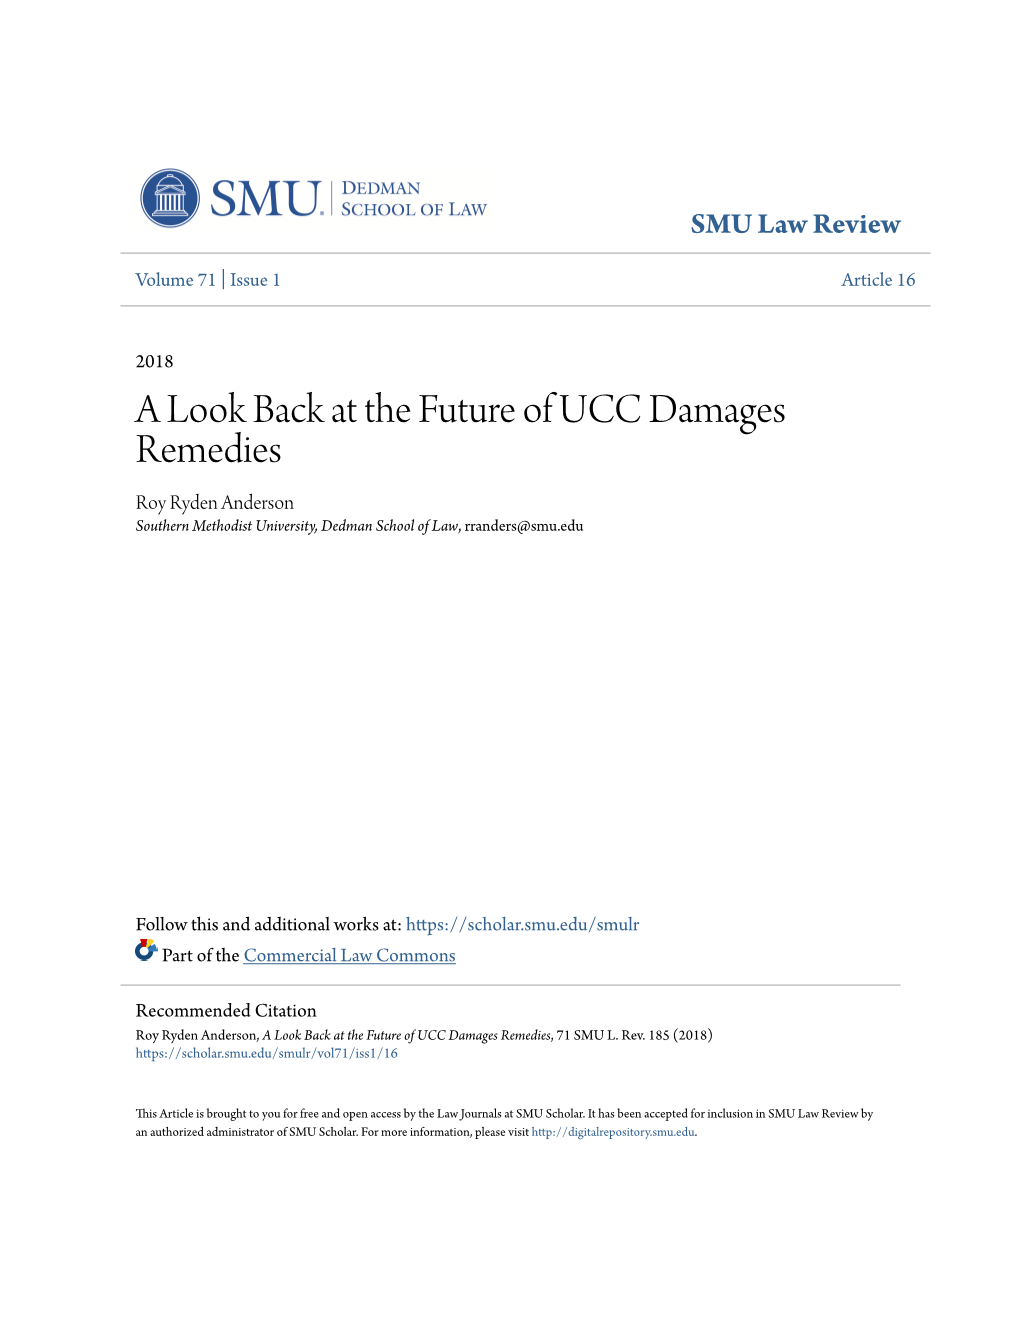 A Look Back at the Future of UCC Damages Remedies Roy Ryden Anderson Southern Methodist University, Dedman School of Law, Rranders@Smu.Edu